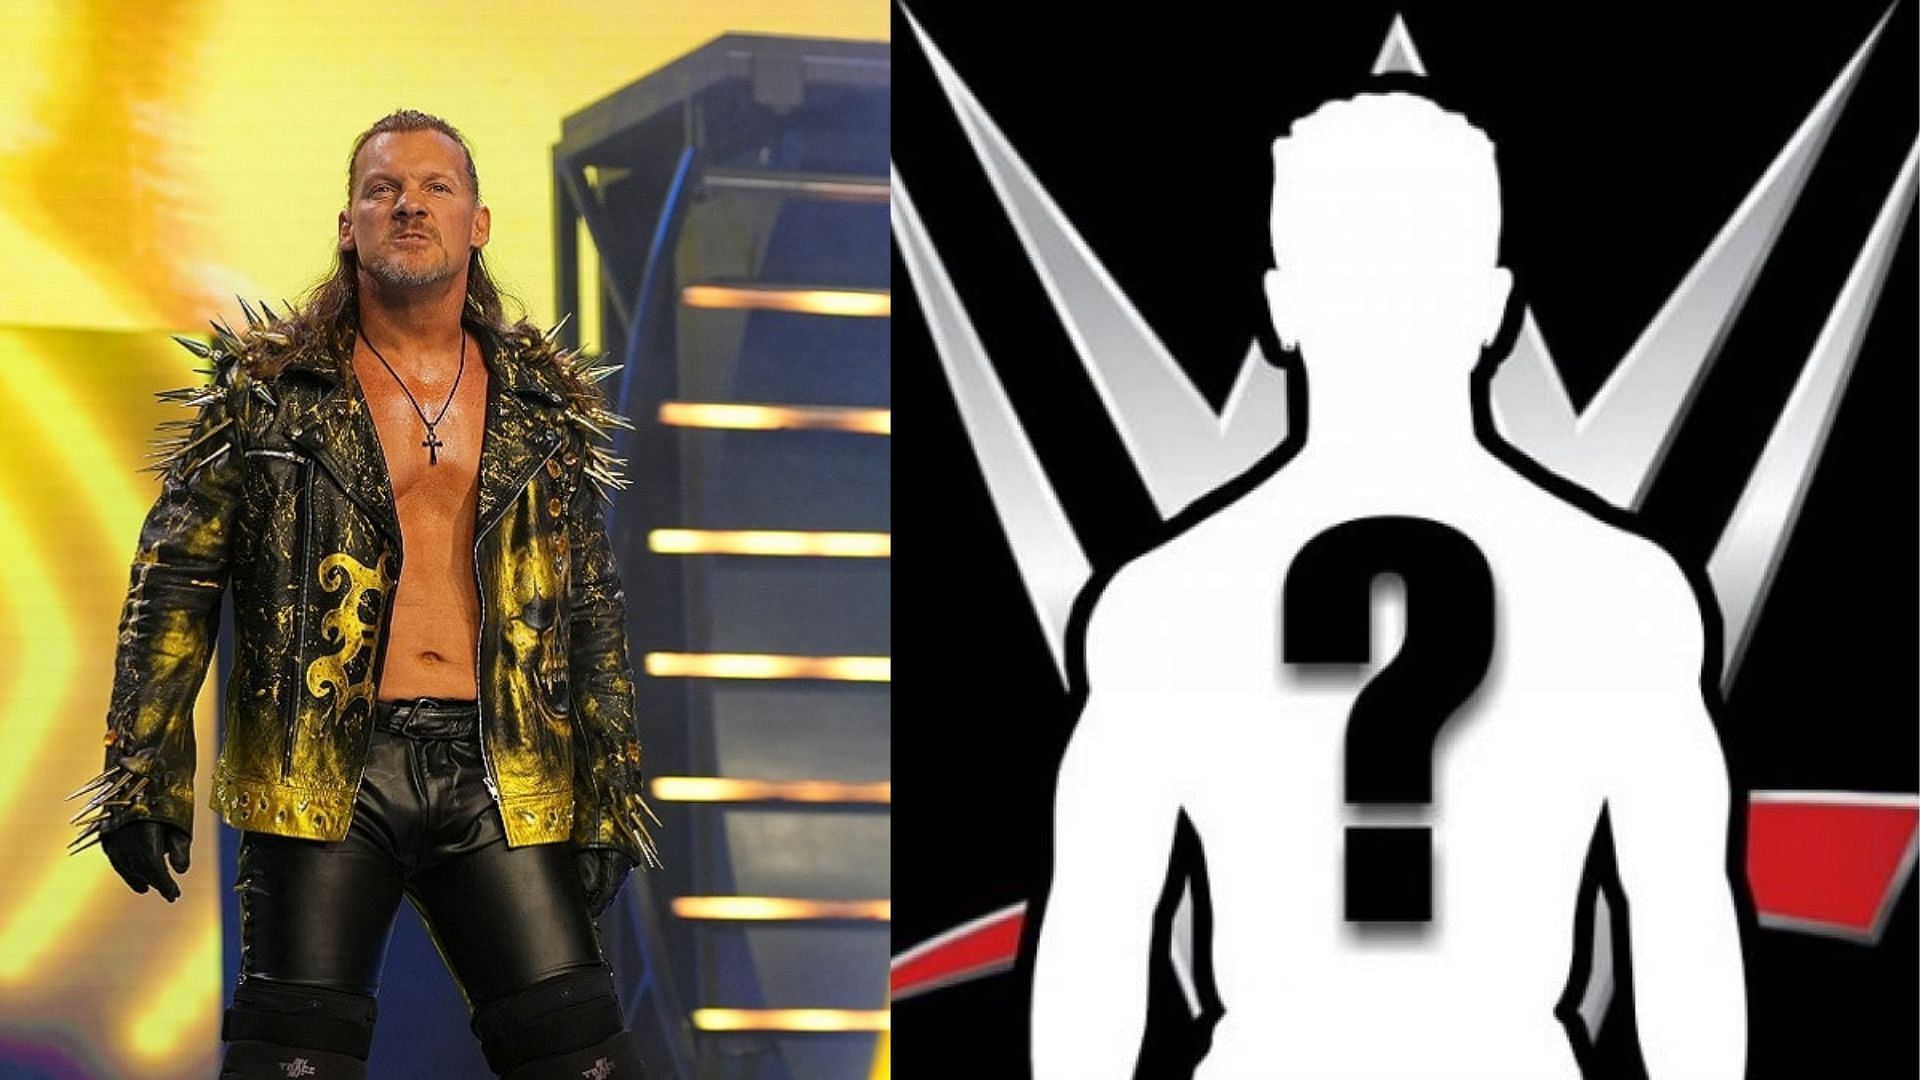 Could Chris Jericho have a major match against a former WWE Superstar soon?